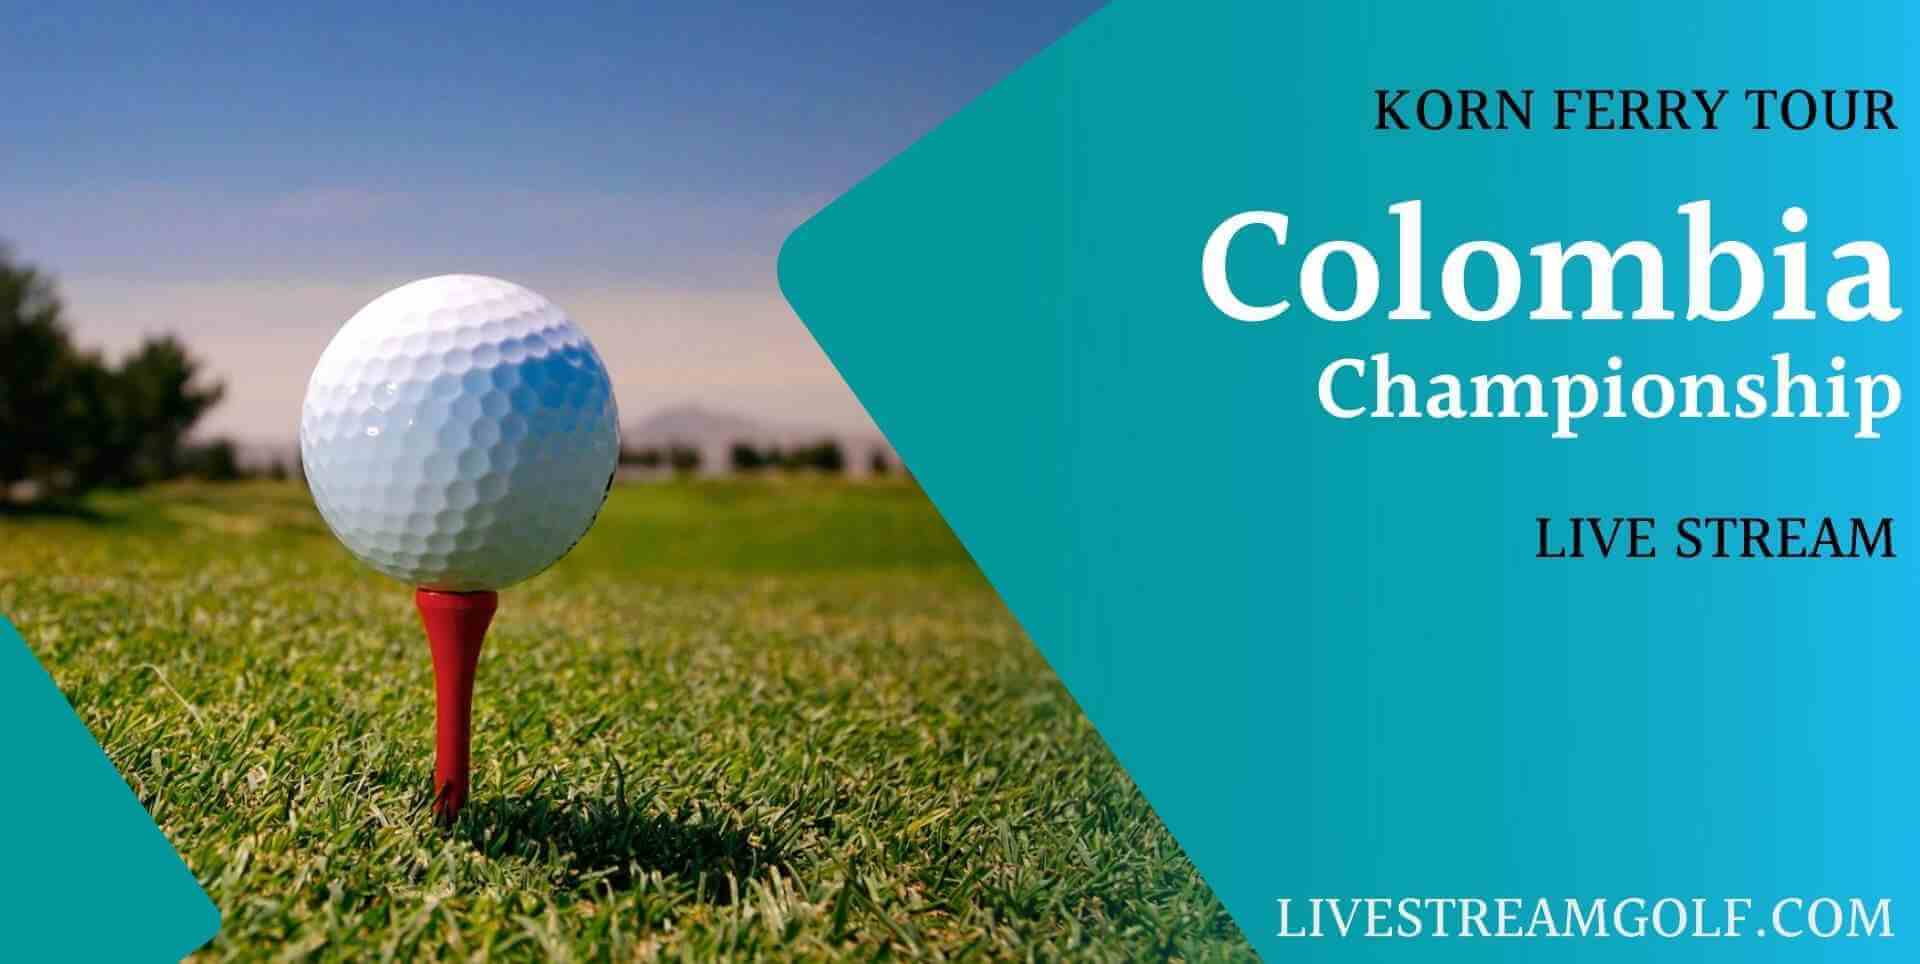 colombia-championship-live-streaming-korn-ferry-golf